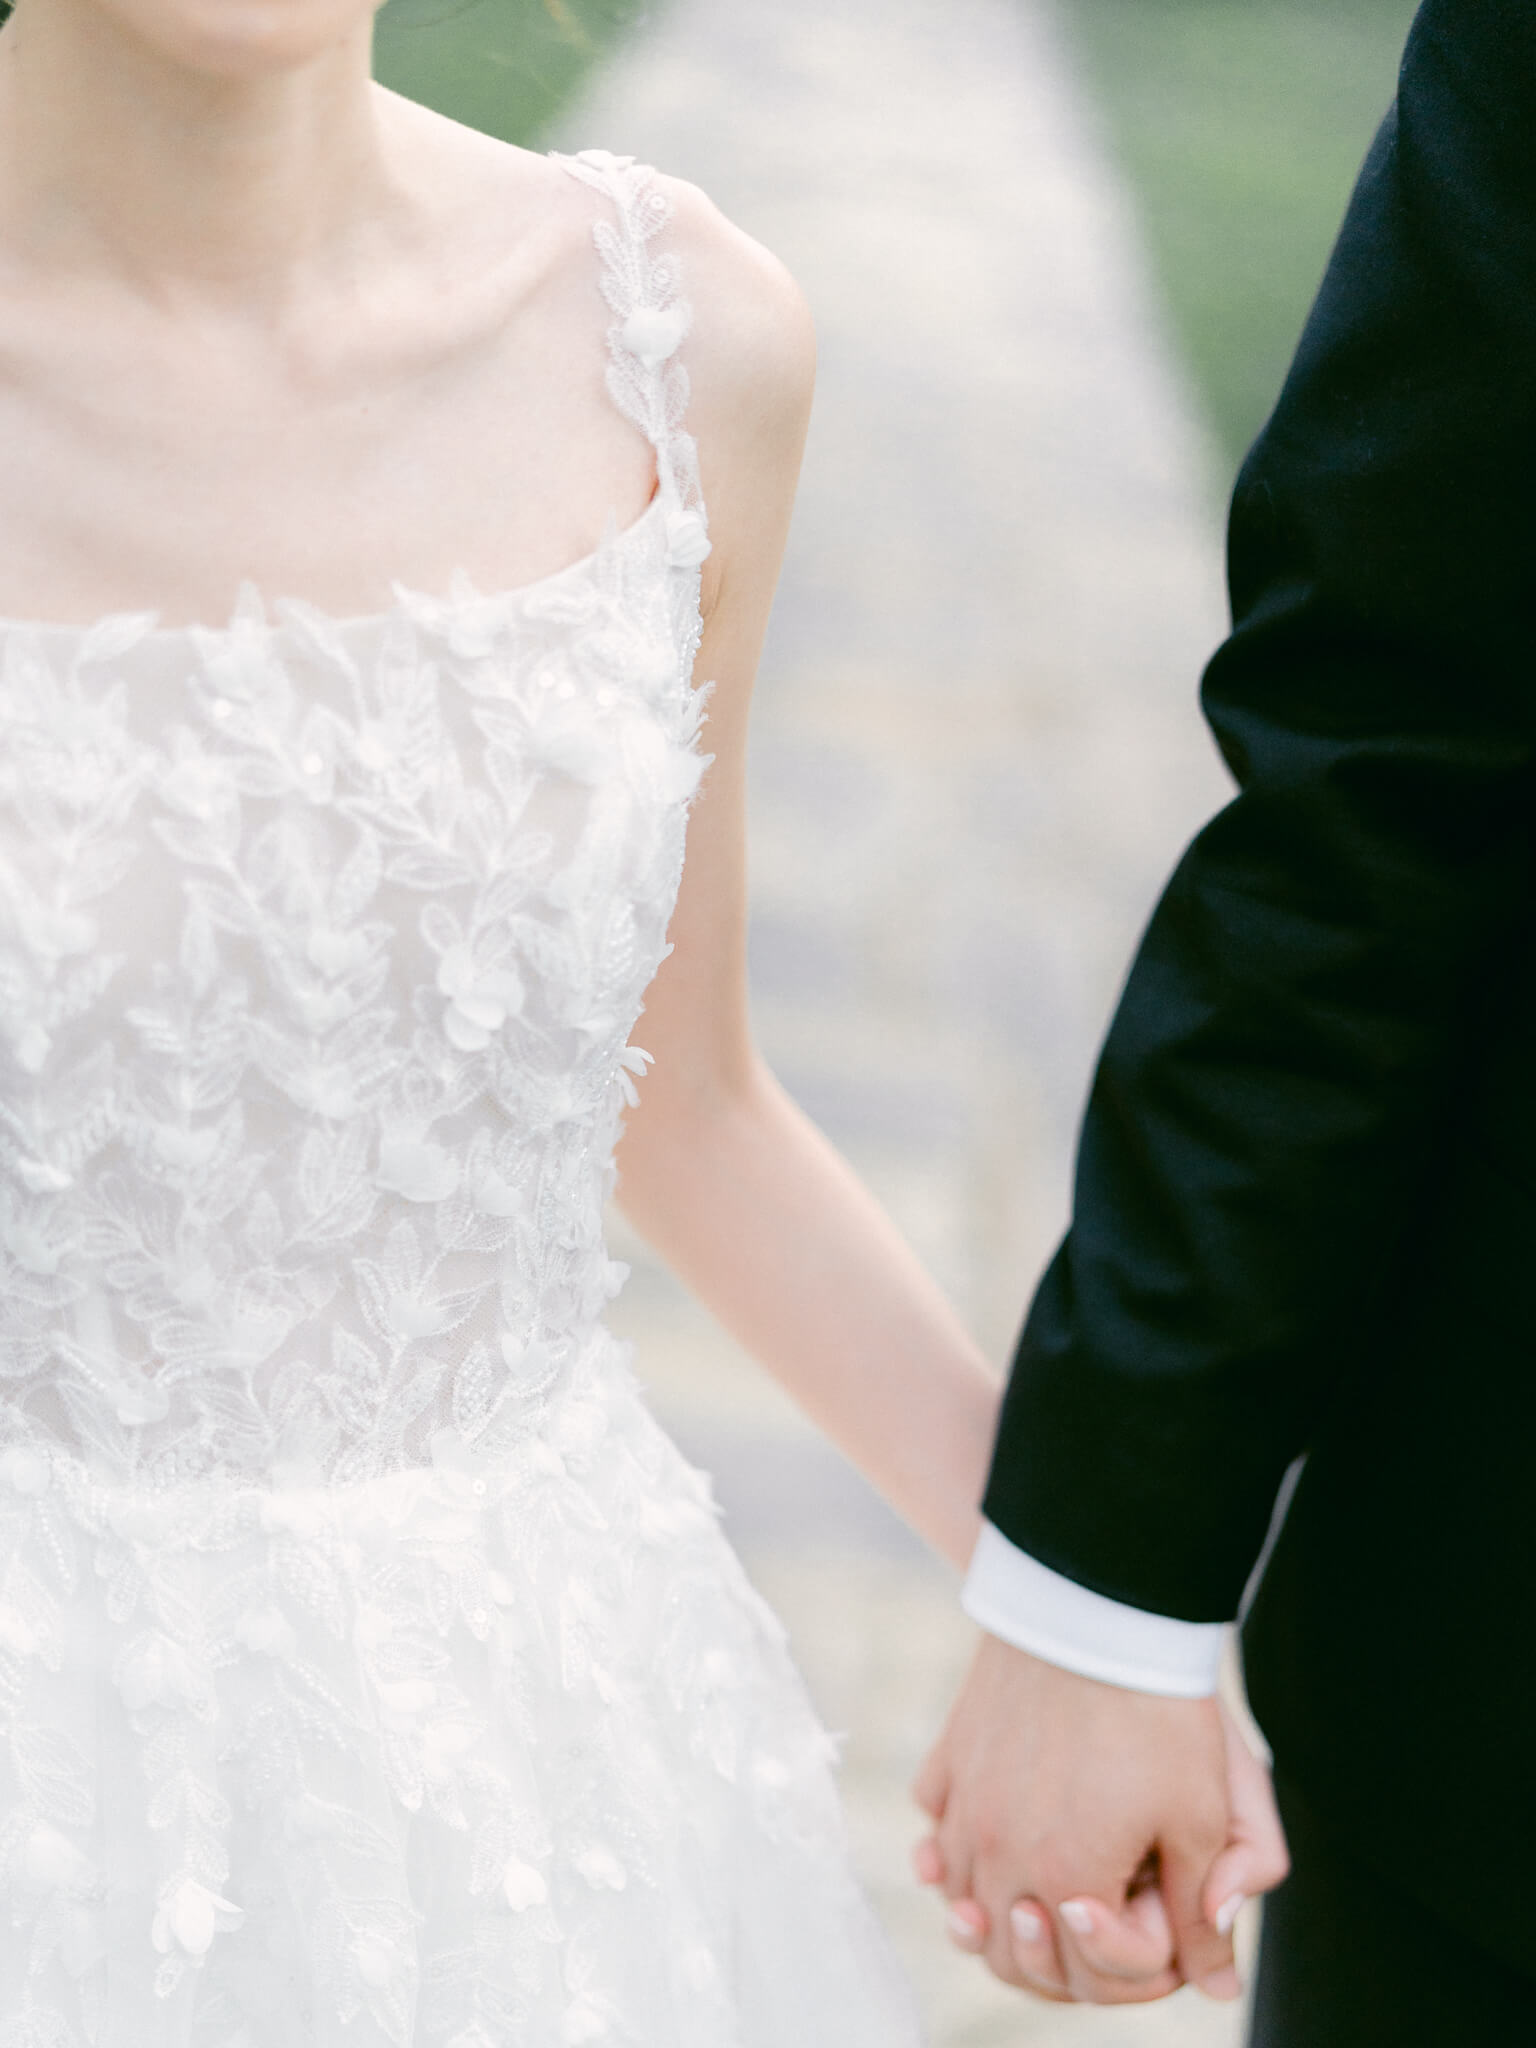 Closeup of a woman in a flower-detail wedding dress holding hands with her groom who is wearing a black suit.